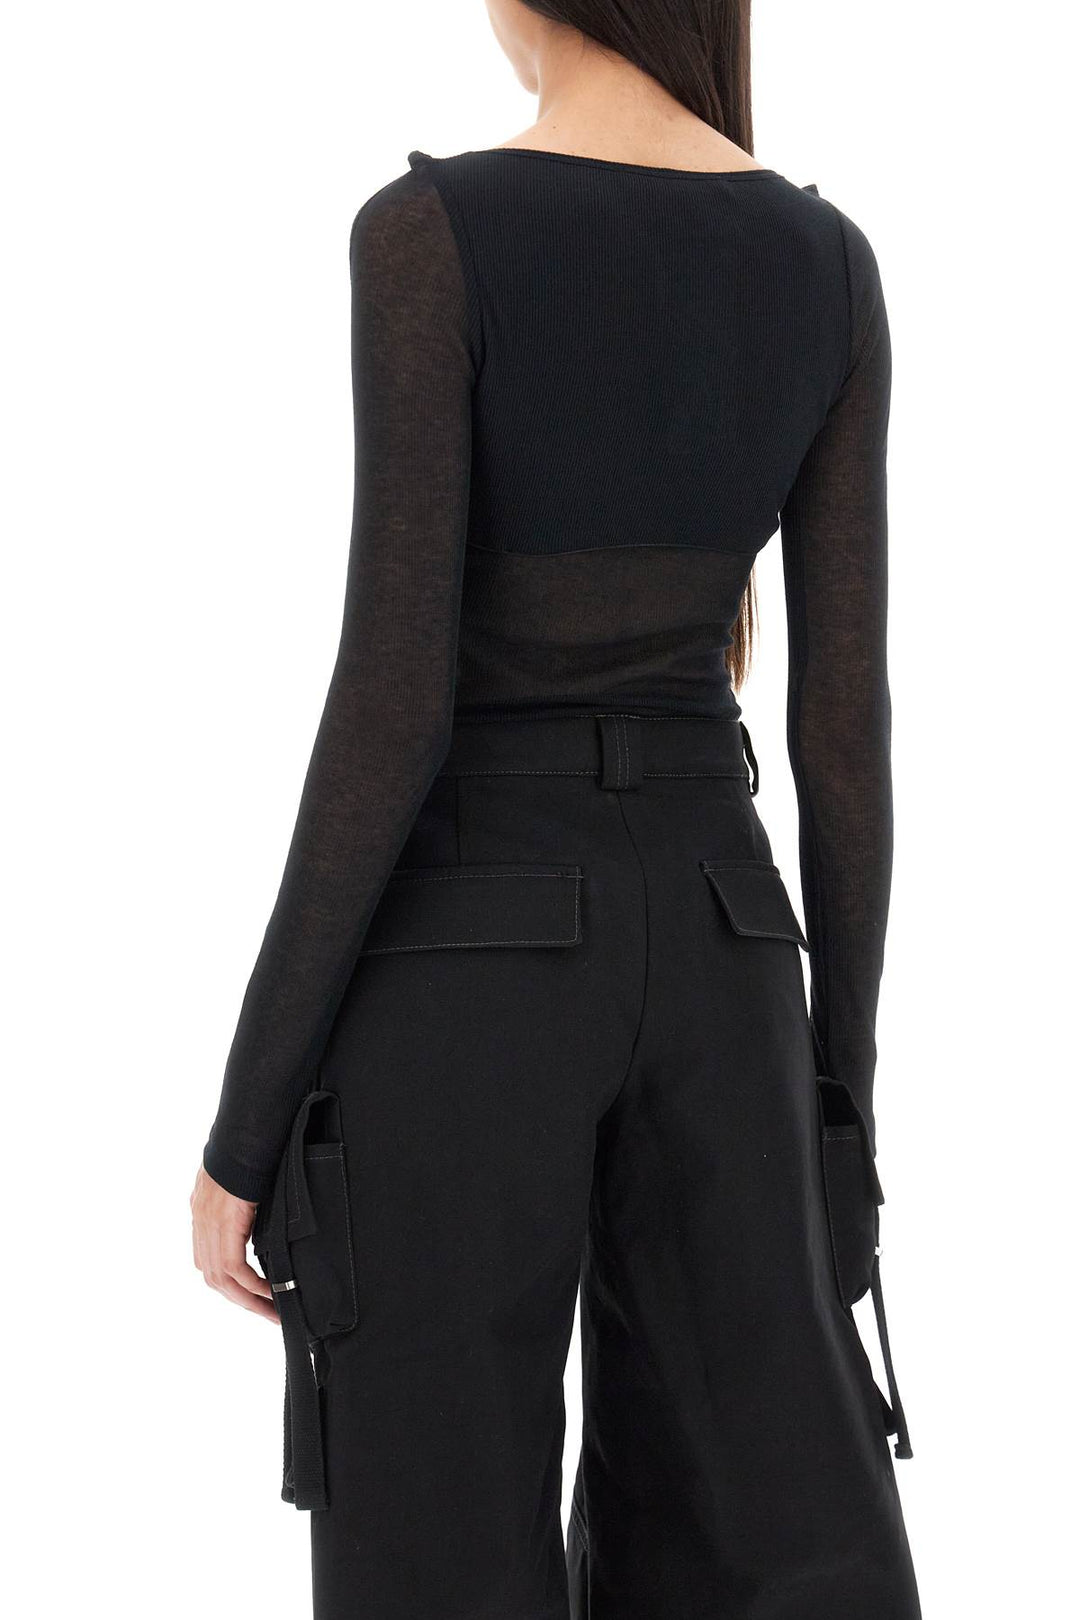 Body A Manica Lunga Con Cut Out - Dion Lee - Donna